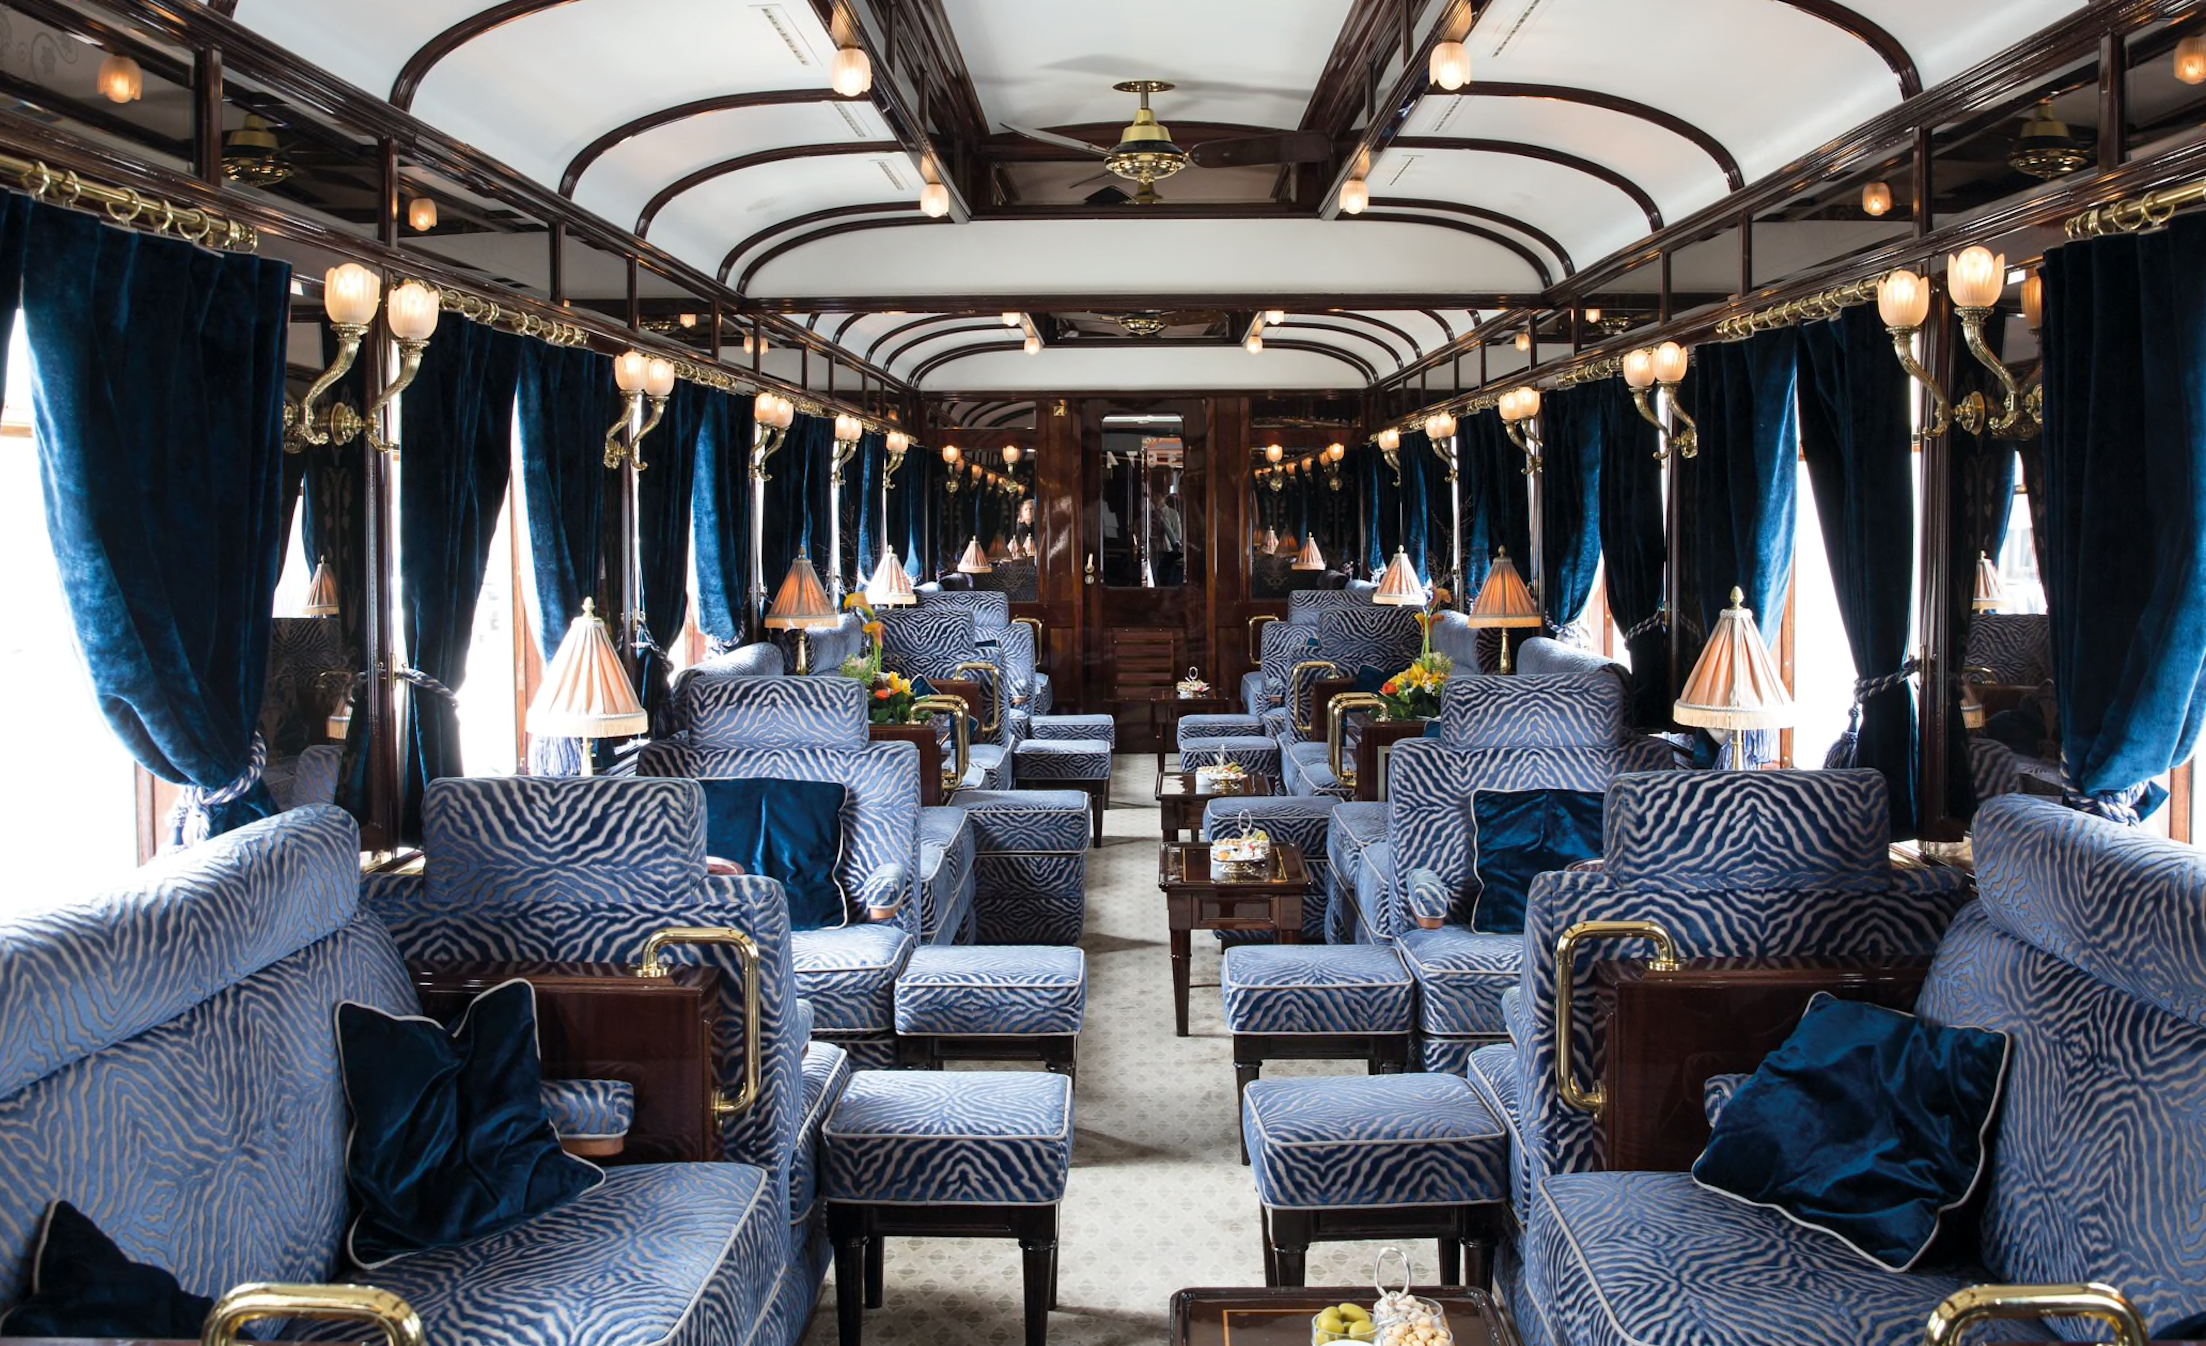 Orient Express Train will be back on tracks in 2023